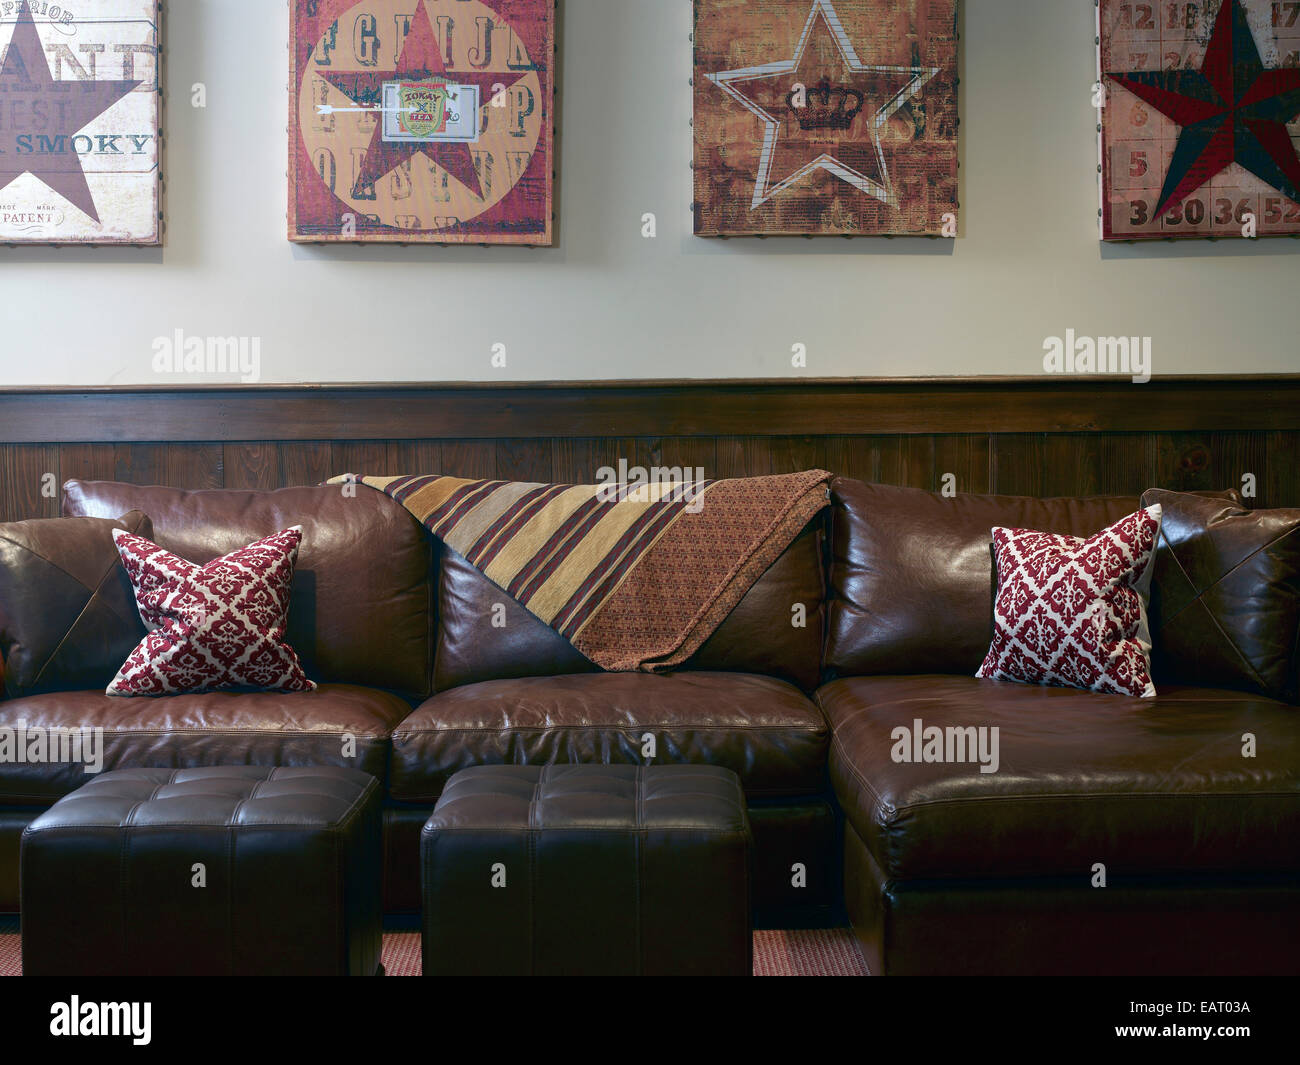 Artwork on wall above leather sofa and footstools, USA Stock Photo